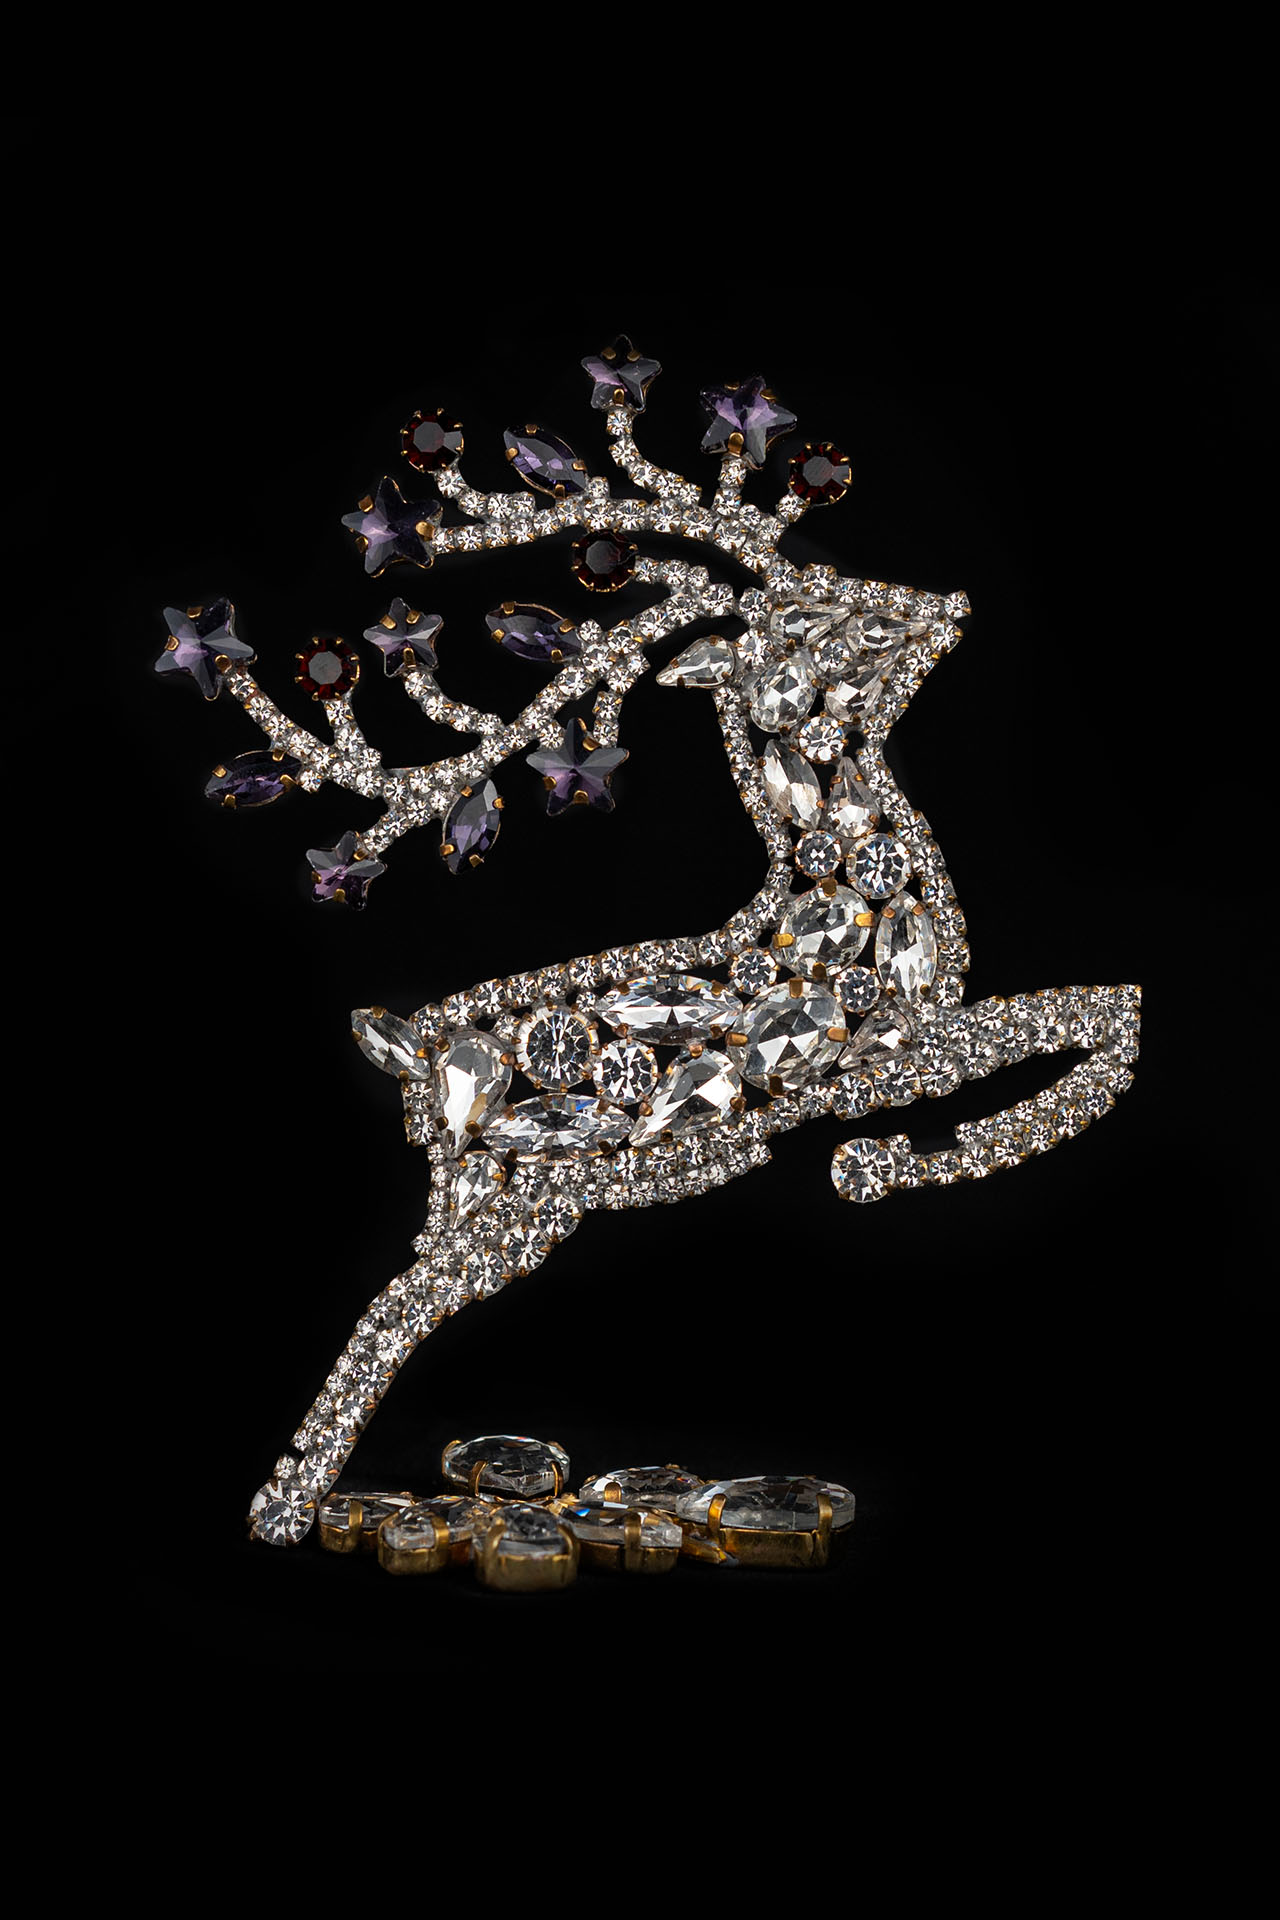 Decorative reindeer figurine with clear rhinestones - facing right